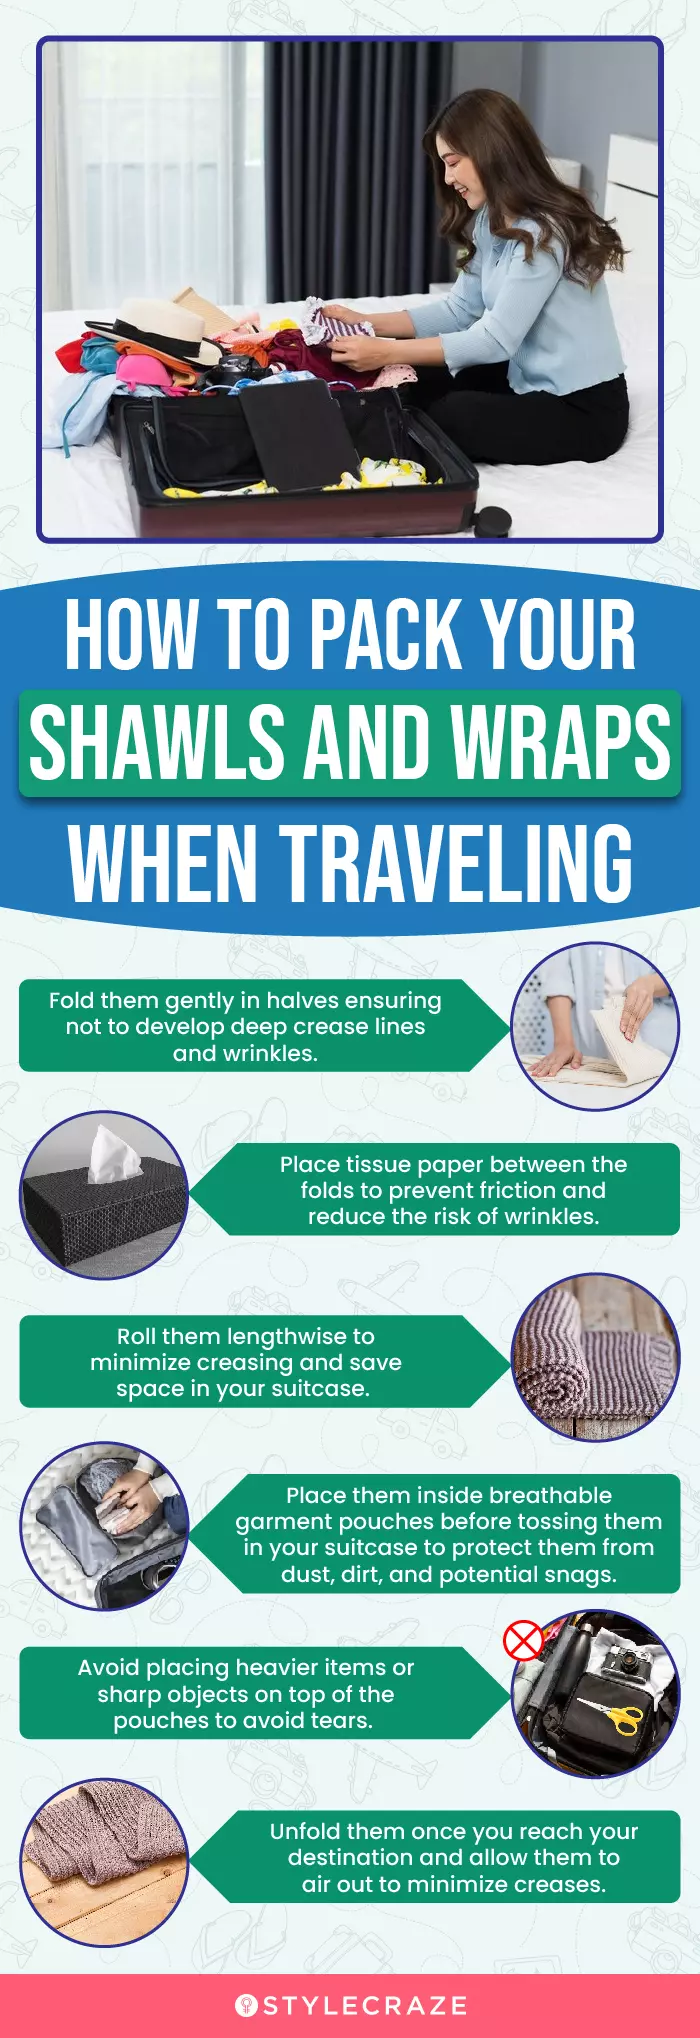 How To Pack Your Shawls And Wraps When Travelling (infographic)